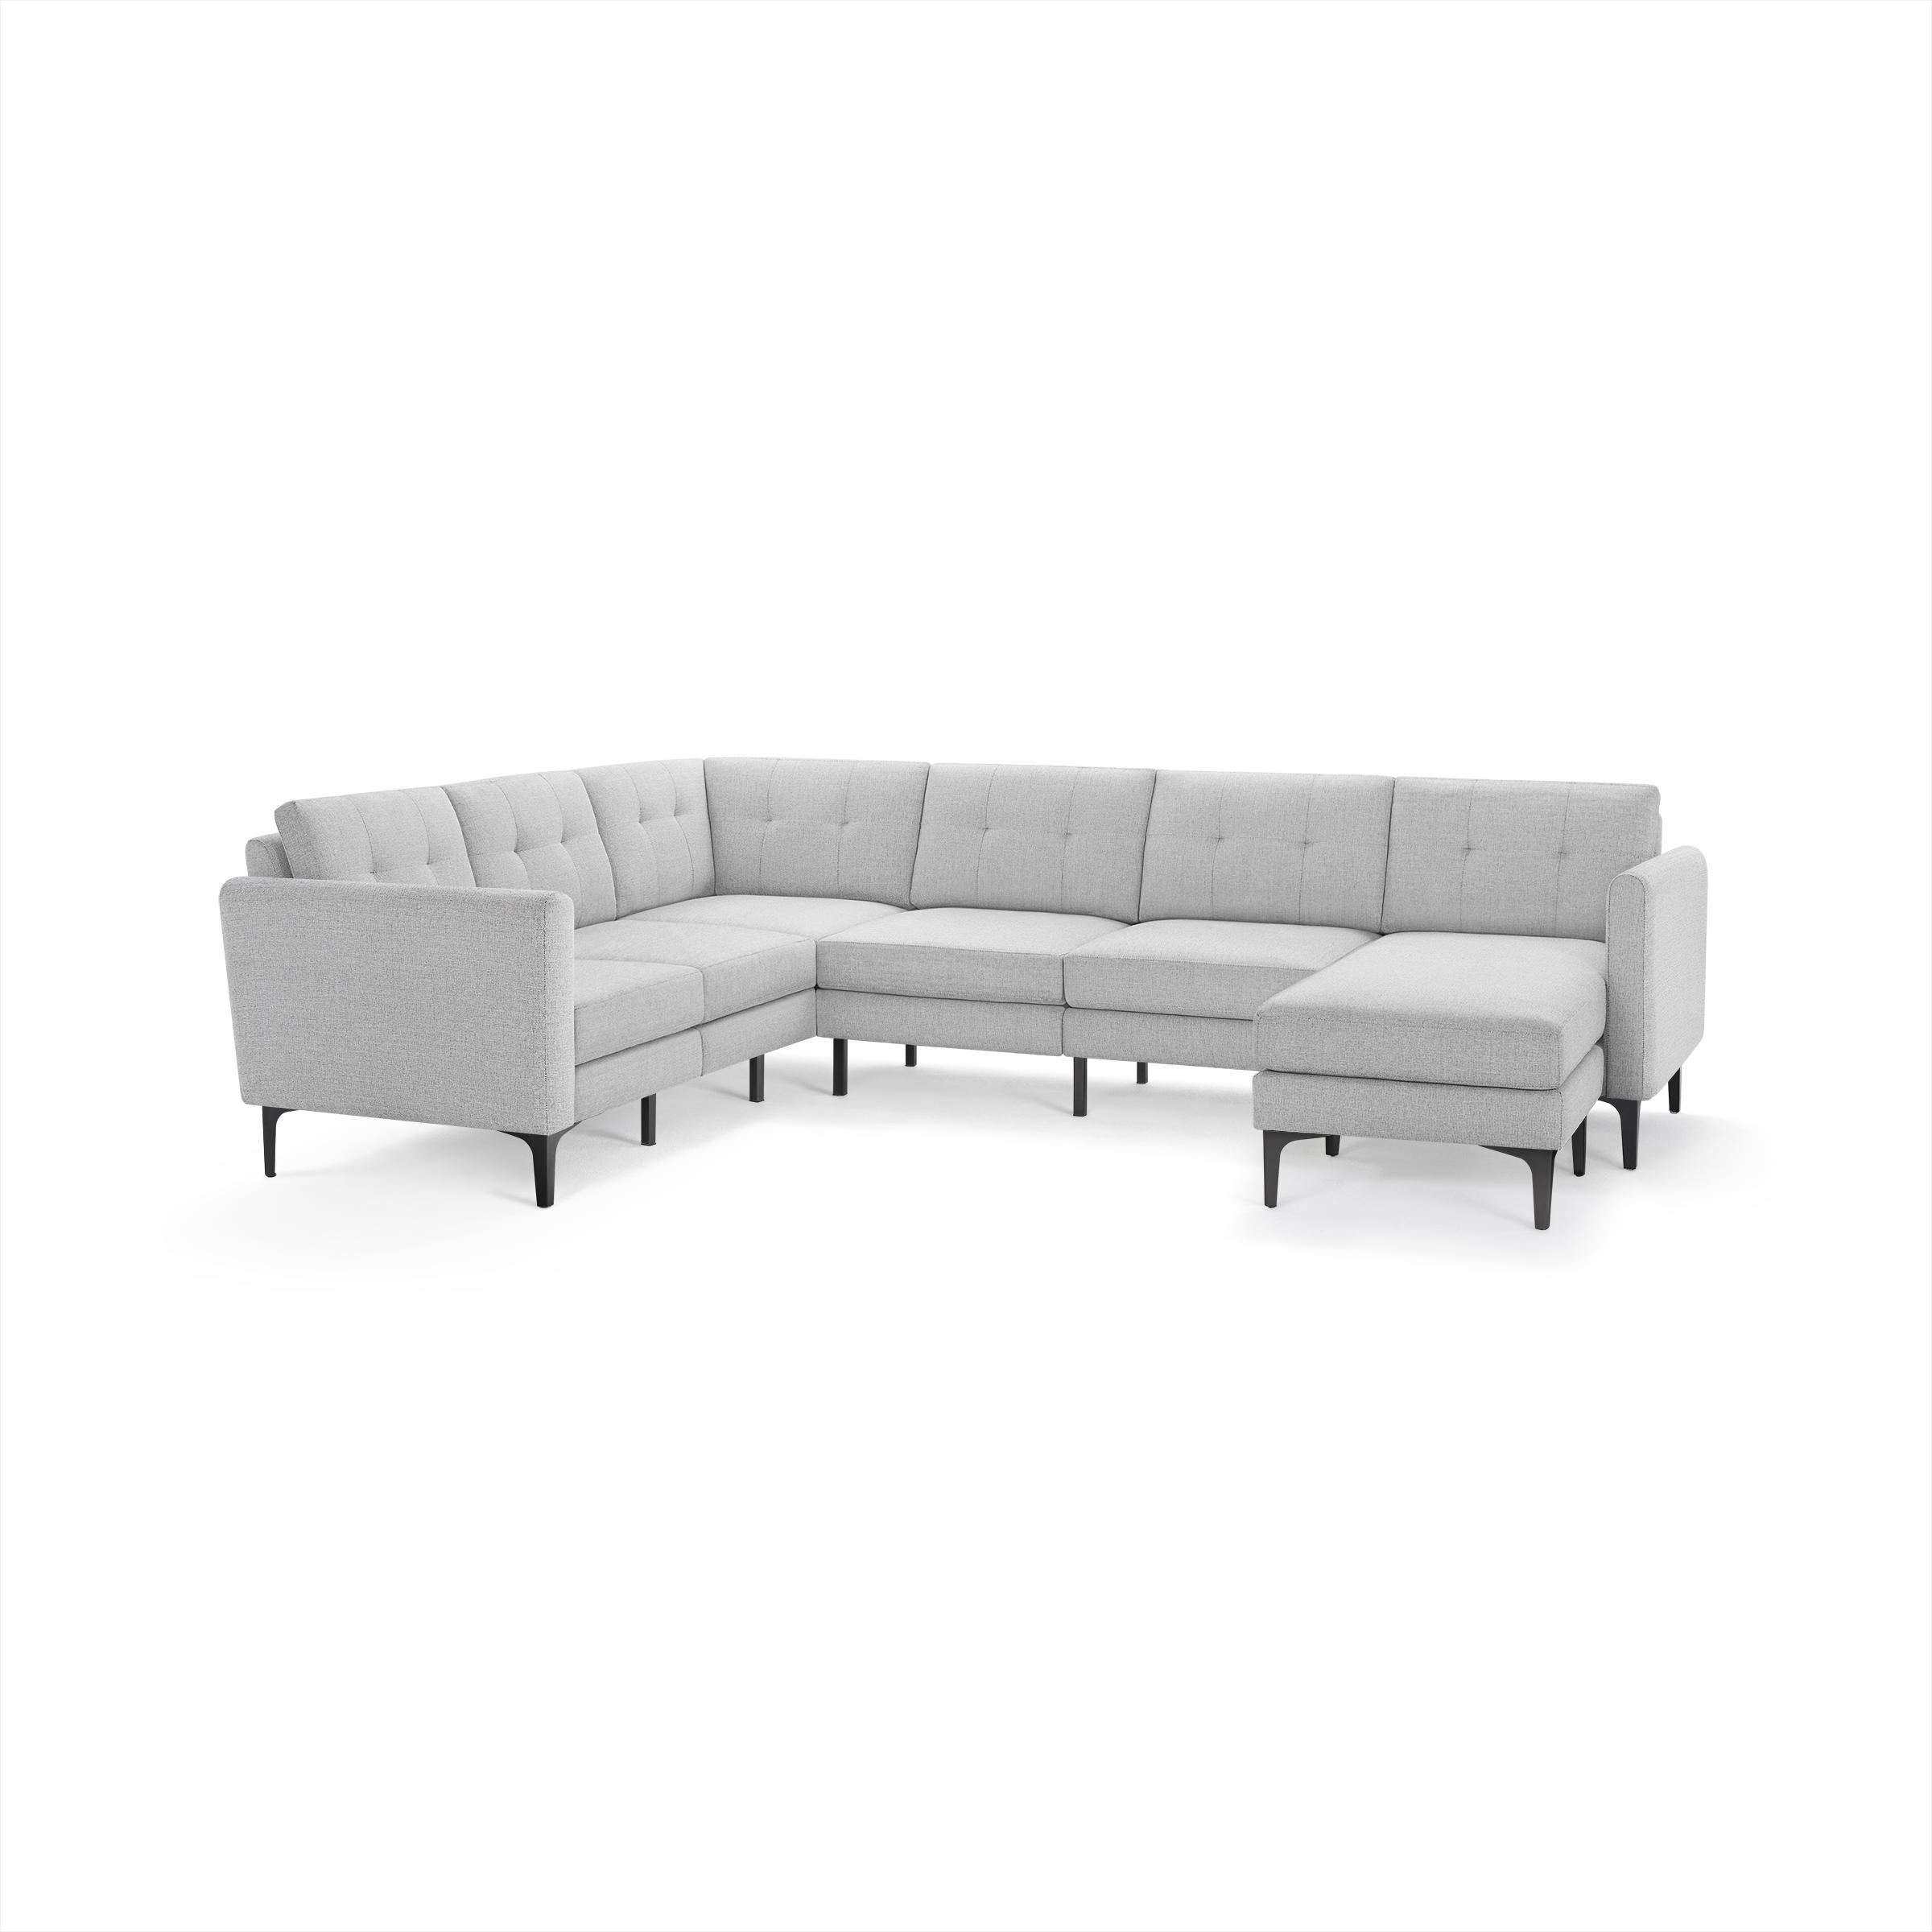 Nomad 6-Seat Corner Sectional with Chaise in Crushed Gravel - Image 1